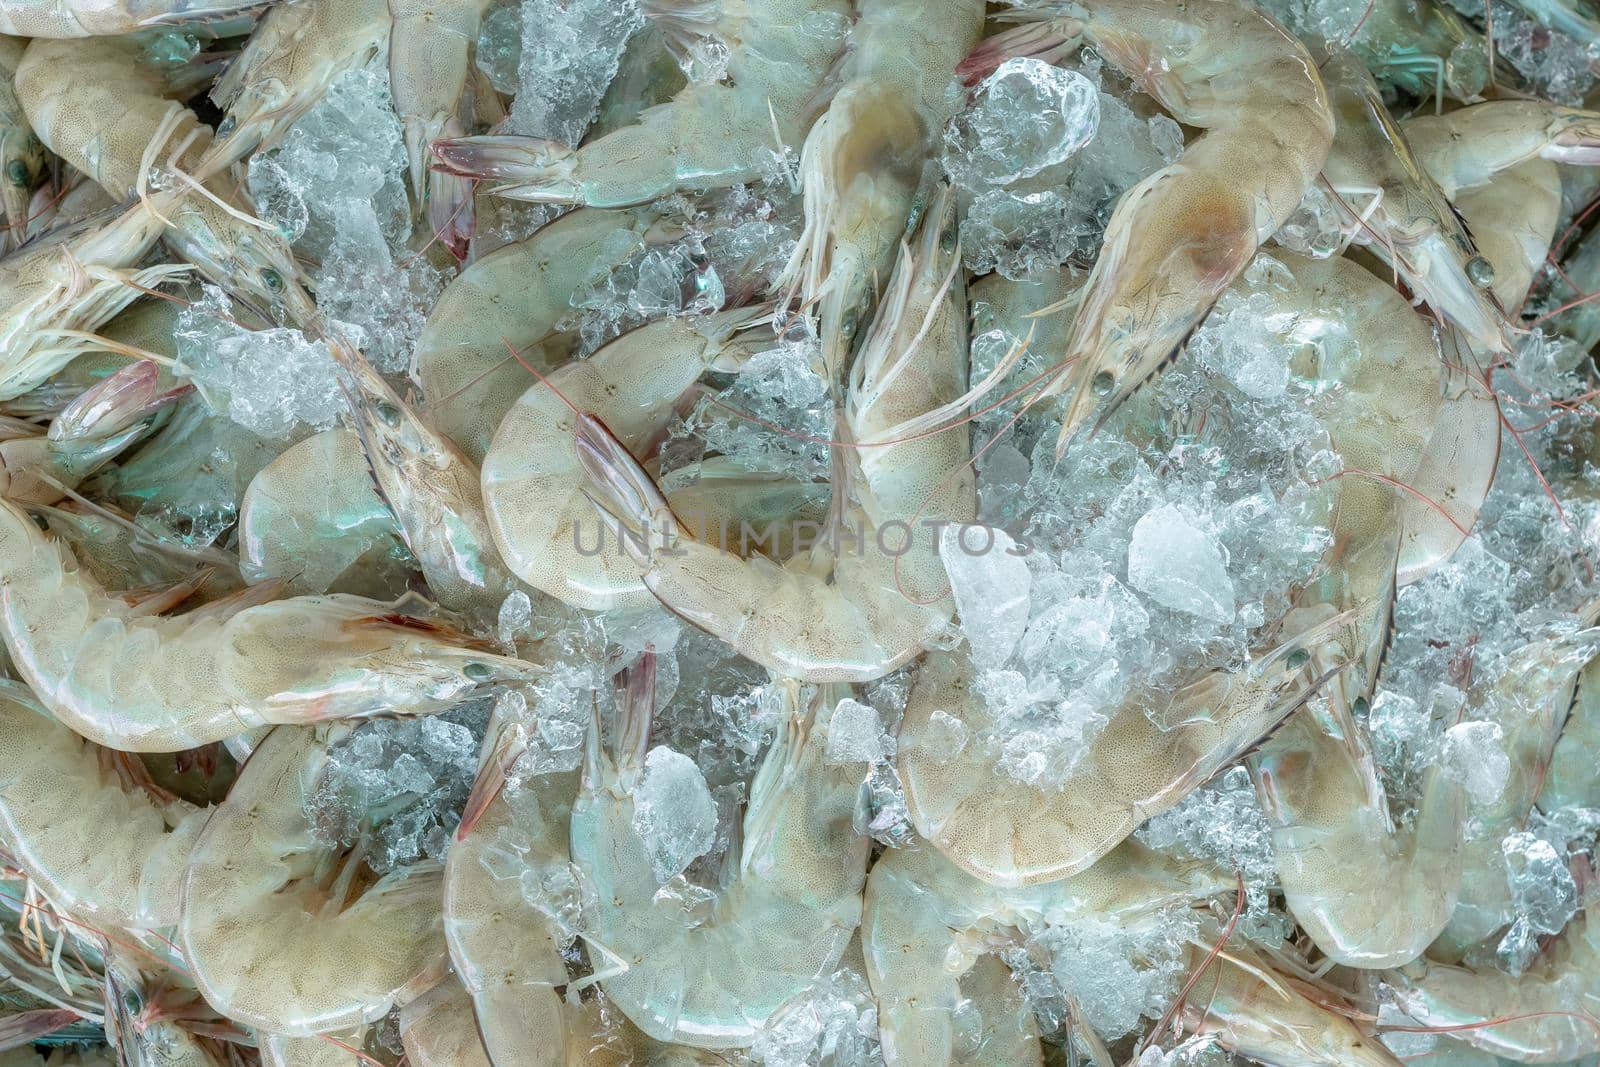 Fresh white shrimps on crushed ice for sale in market. Raw prawns for cooking in seafood restaurant. Sea food industry. Shellfish animal. Shrimp market. Uncooked prawn. Shrimp for frozen food factory. by Fahroni